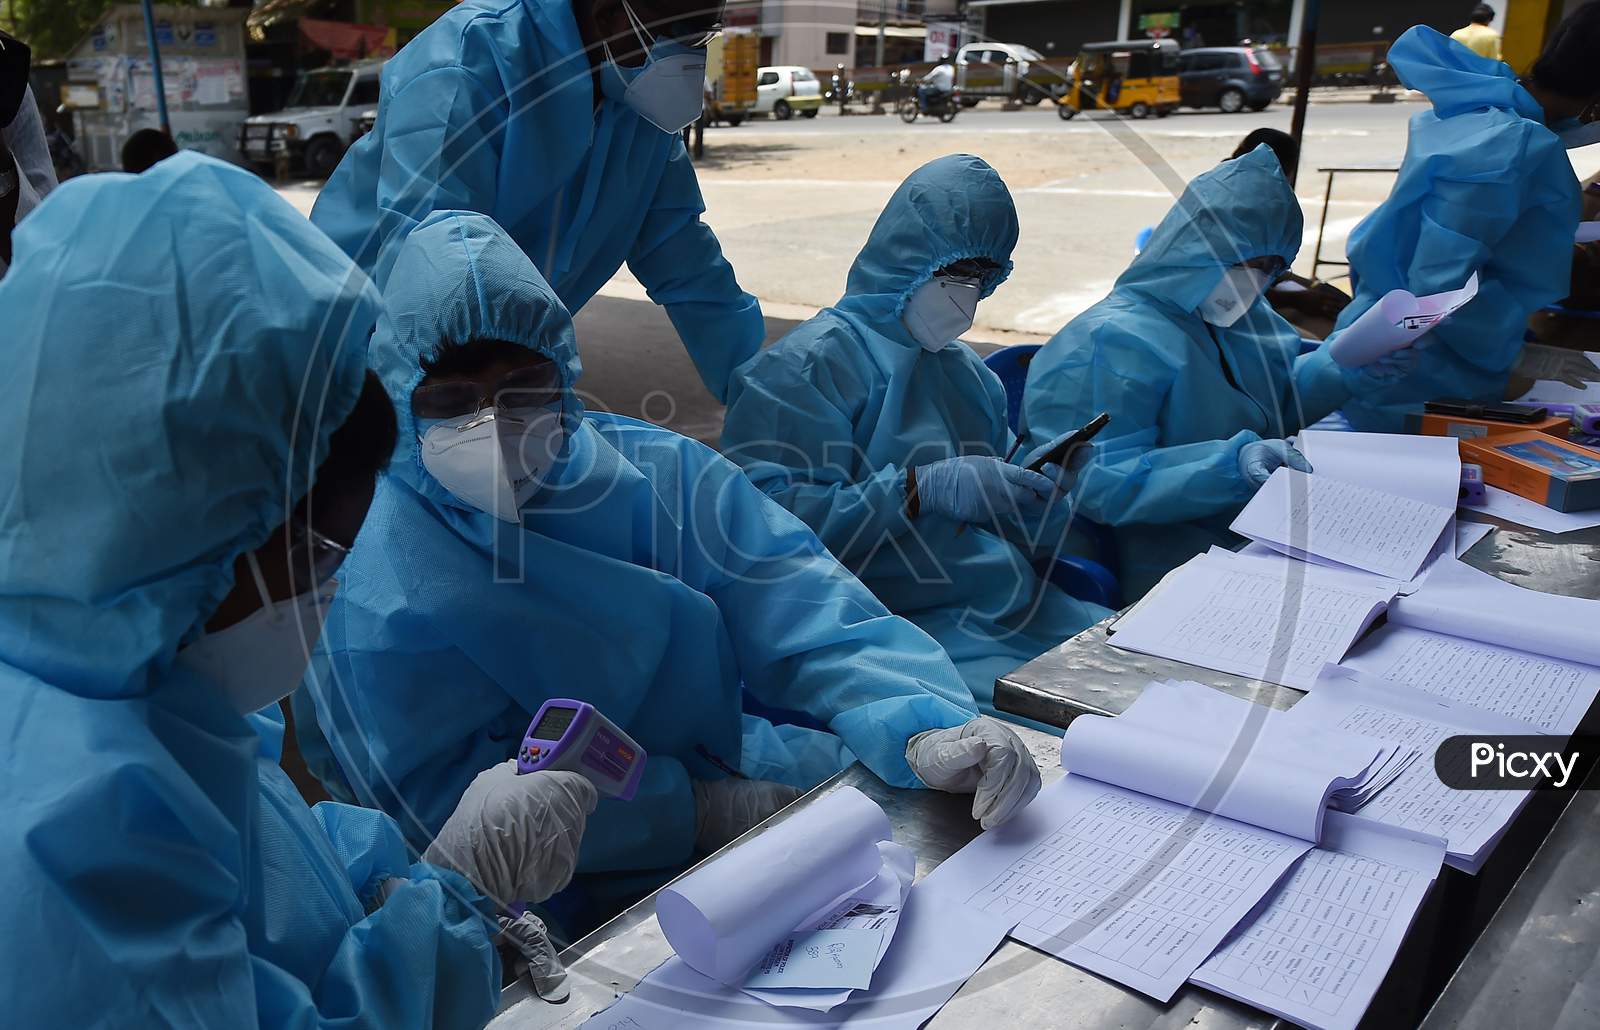 Health Workers Conducting The Thermal Screening Of Migrant Labourers From Bihar During The Ongoing Nationwide Lockdown In The Wake Of Coronavirus Pandemic, In Chennai